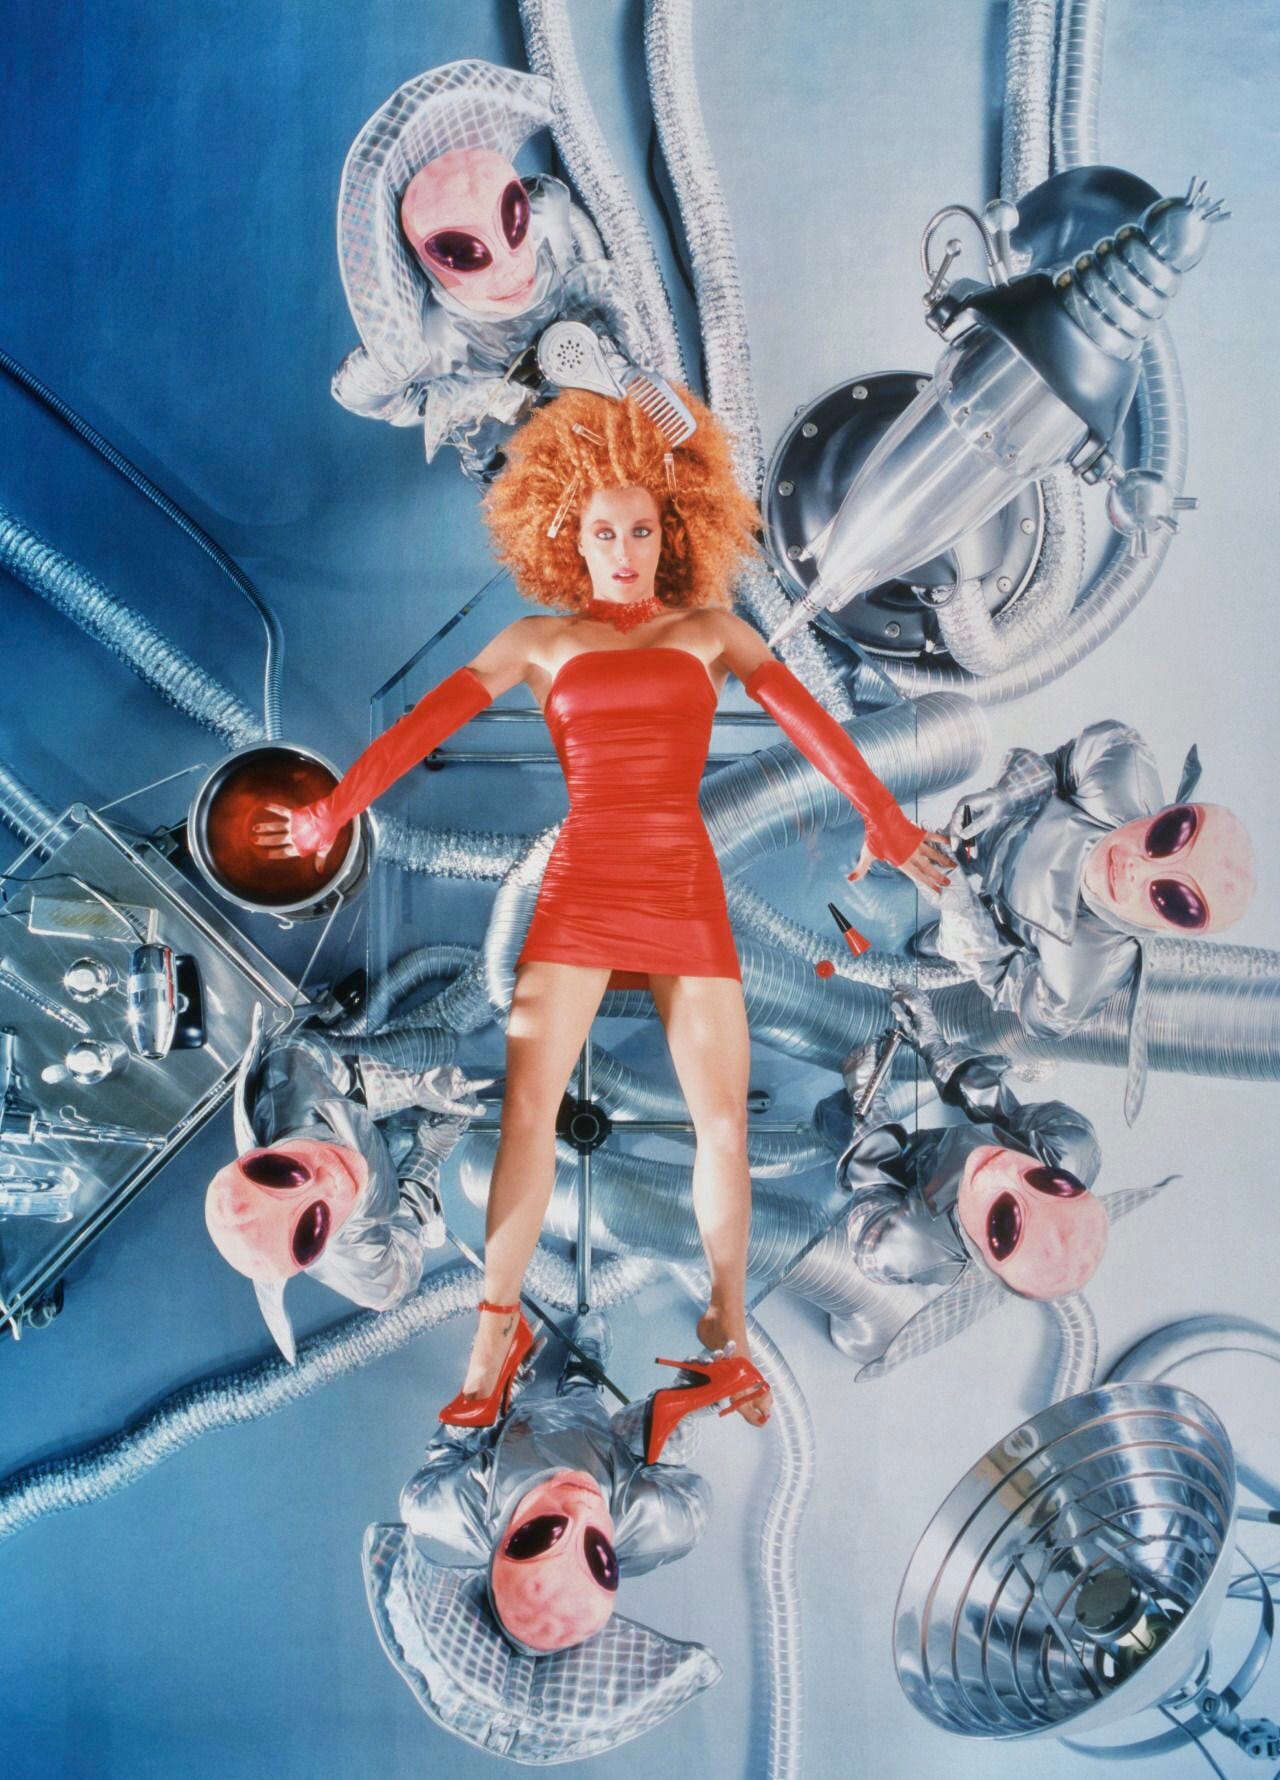 WEIRDLAND TV on Twitter: "David Duchovny and Gillian Anderson photographed  by David LaChapelle in 1997. I didn't watch X-FILES. I remember coming  across the first image in a mag like Total Film